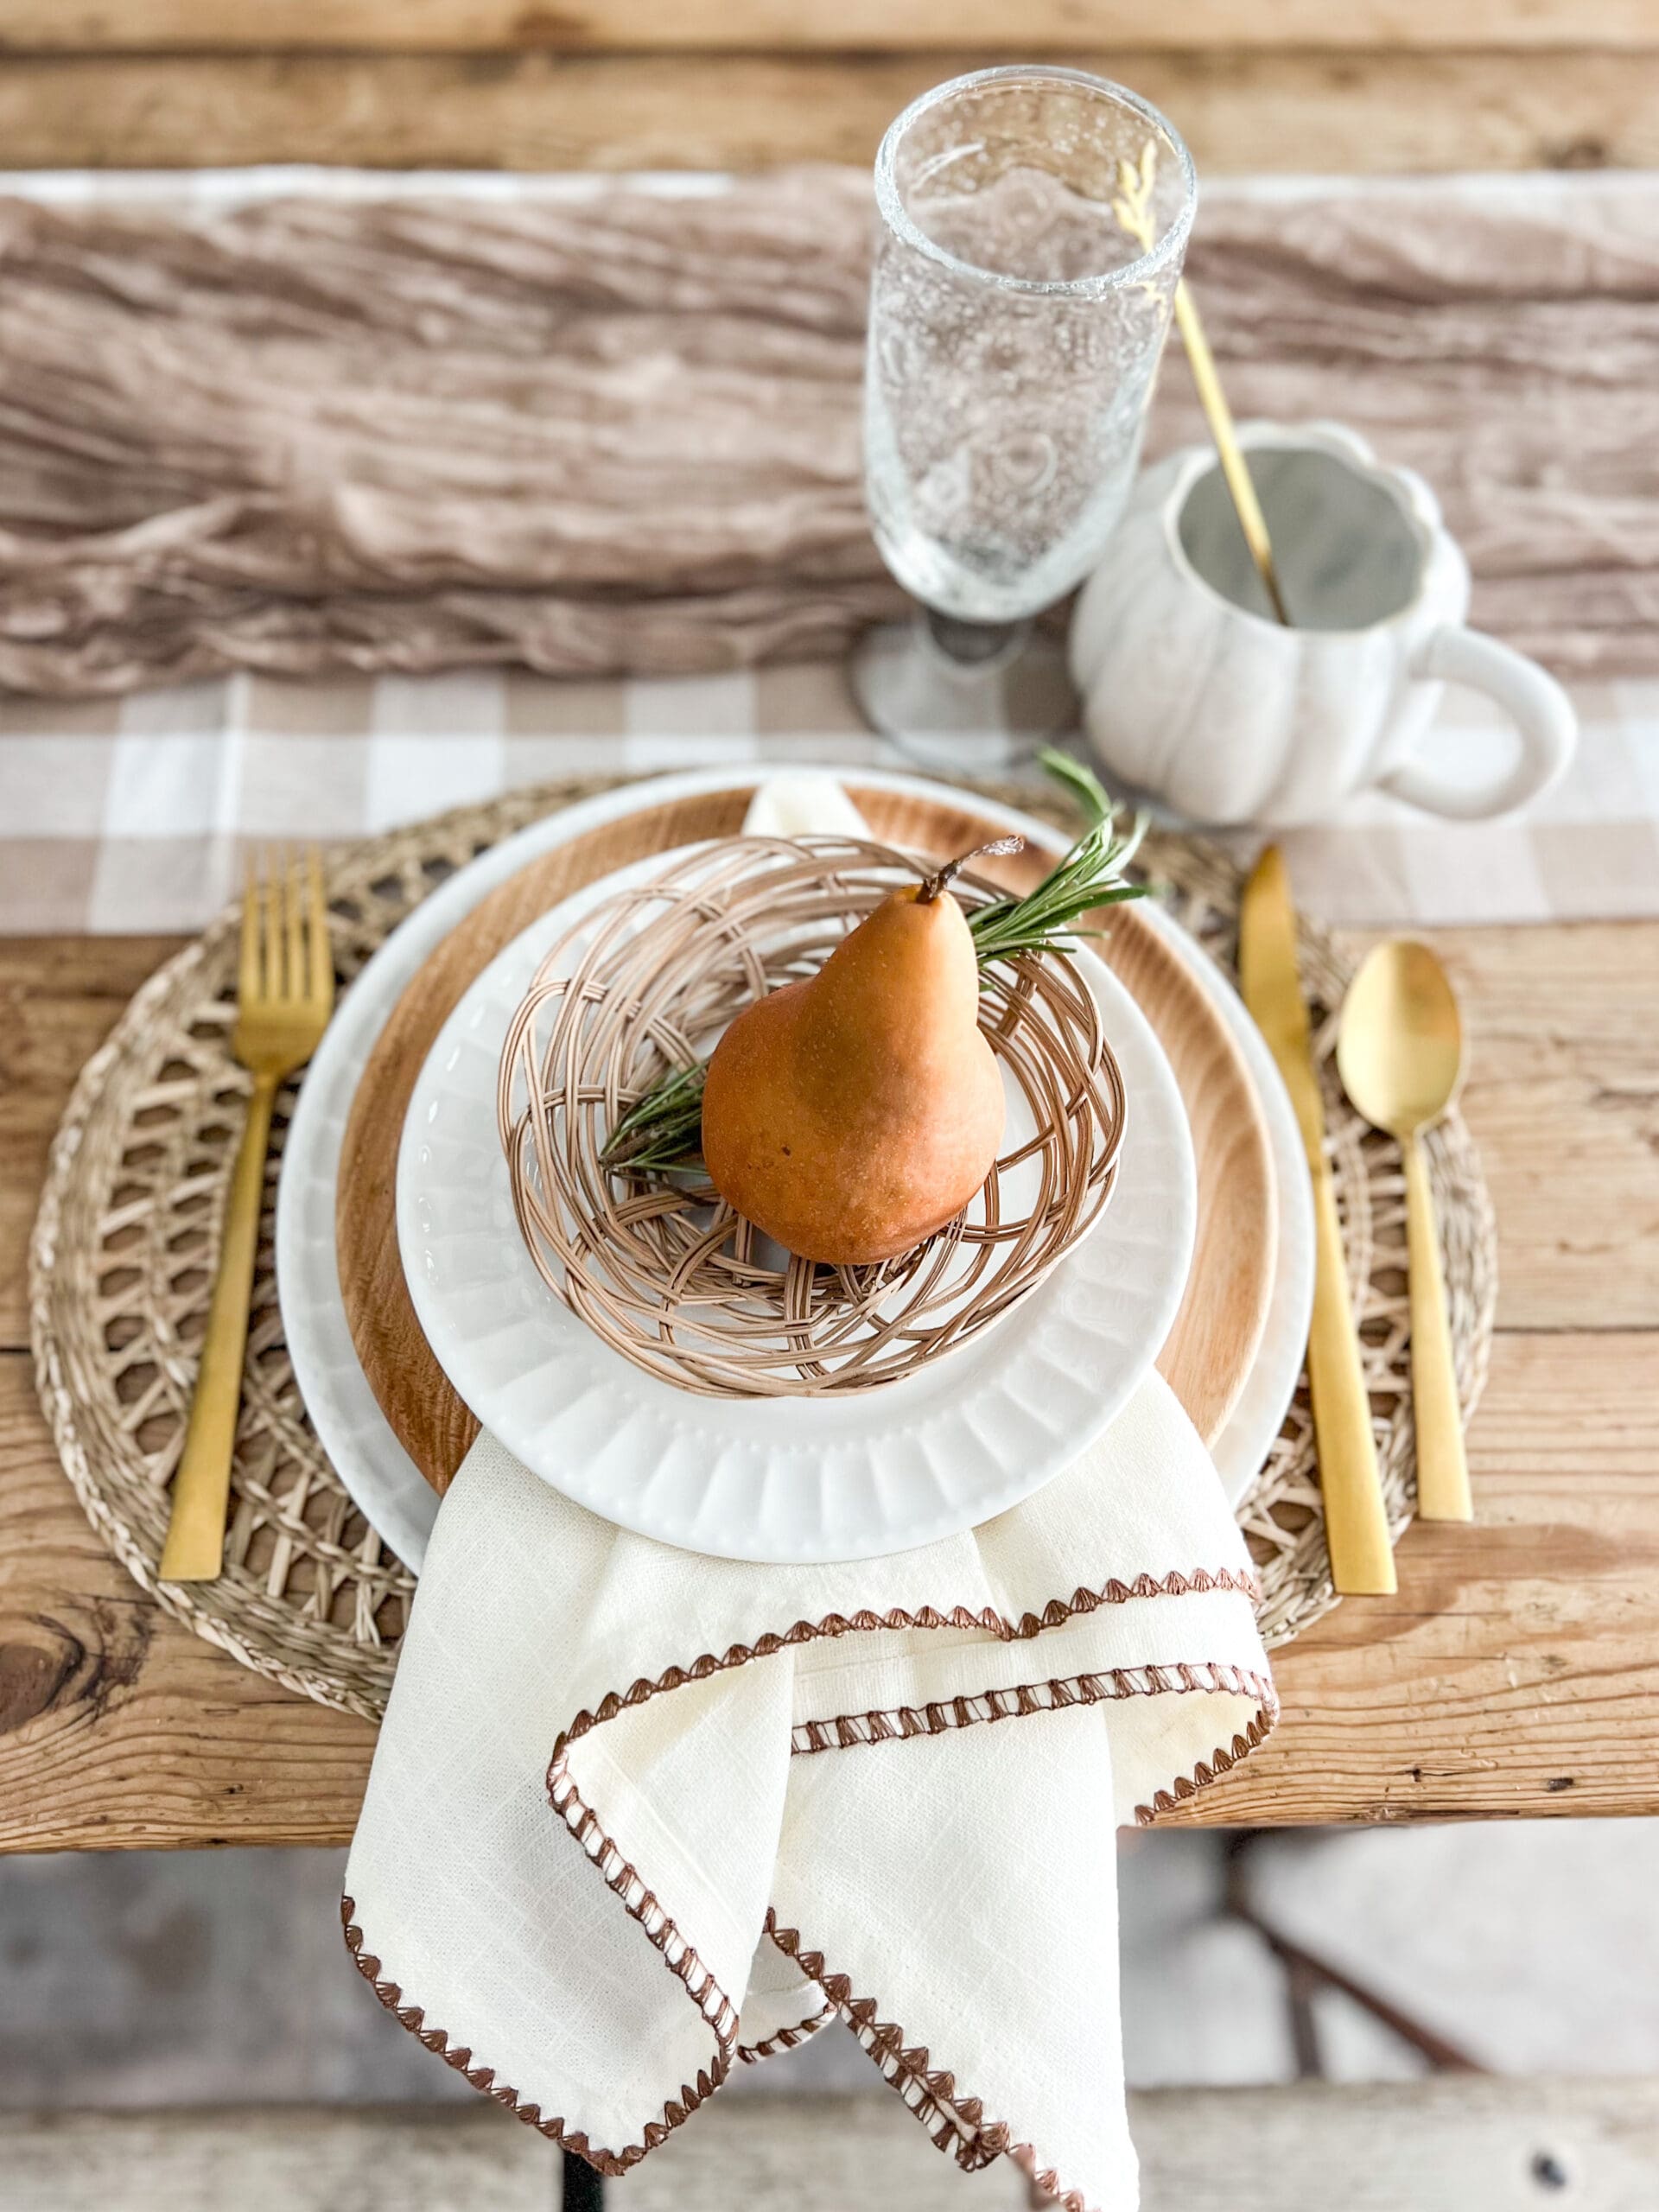 small pear with a rosemary sprig in a small woven basket on white dishes